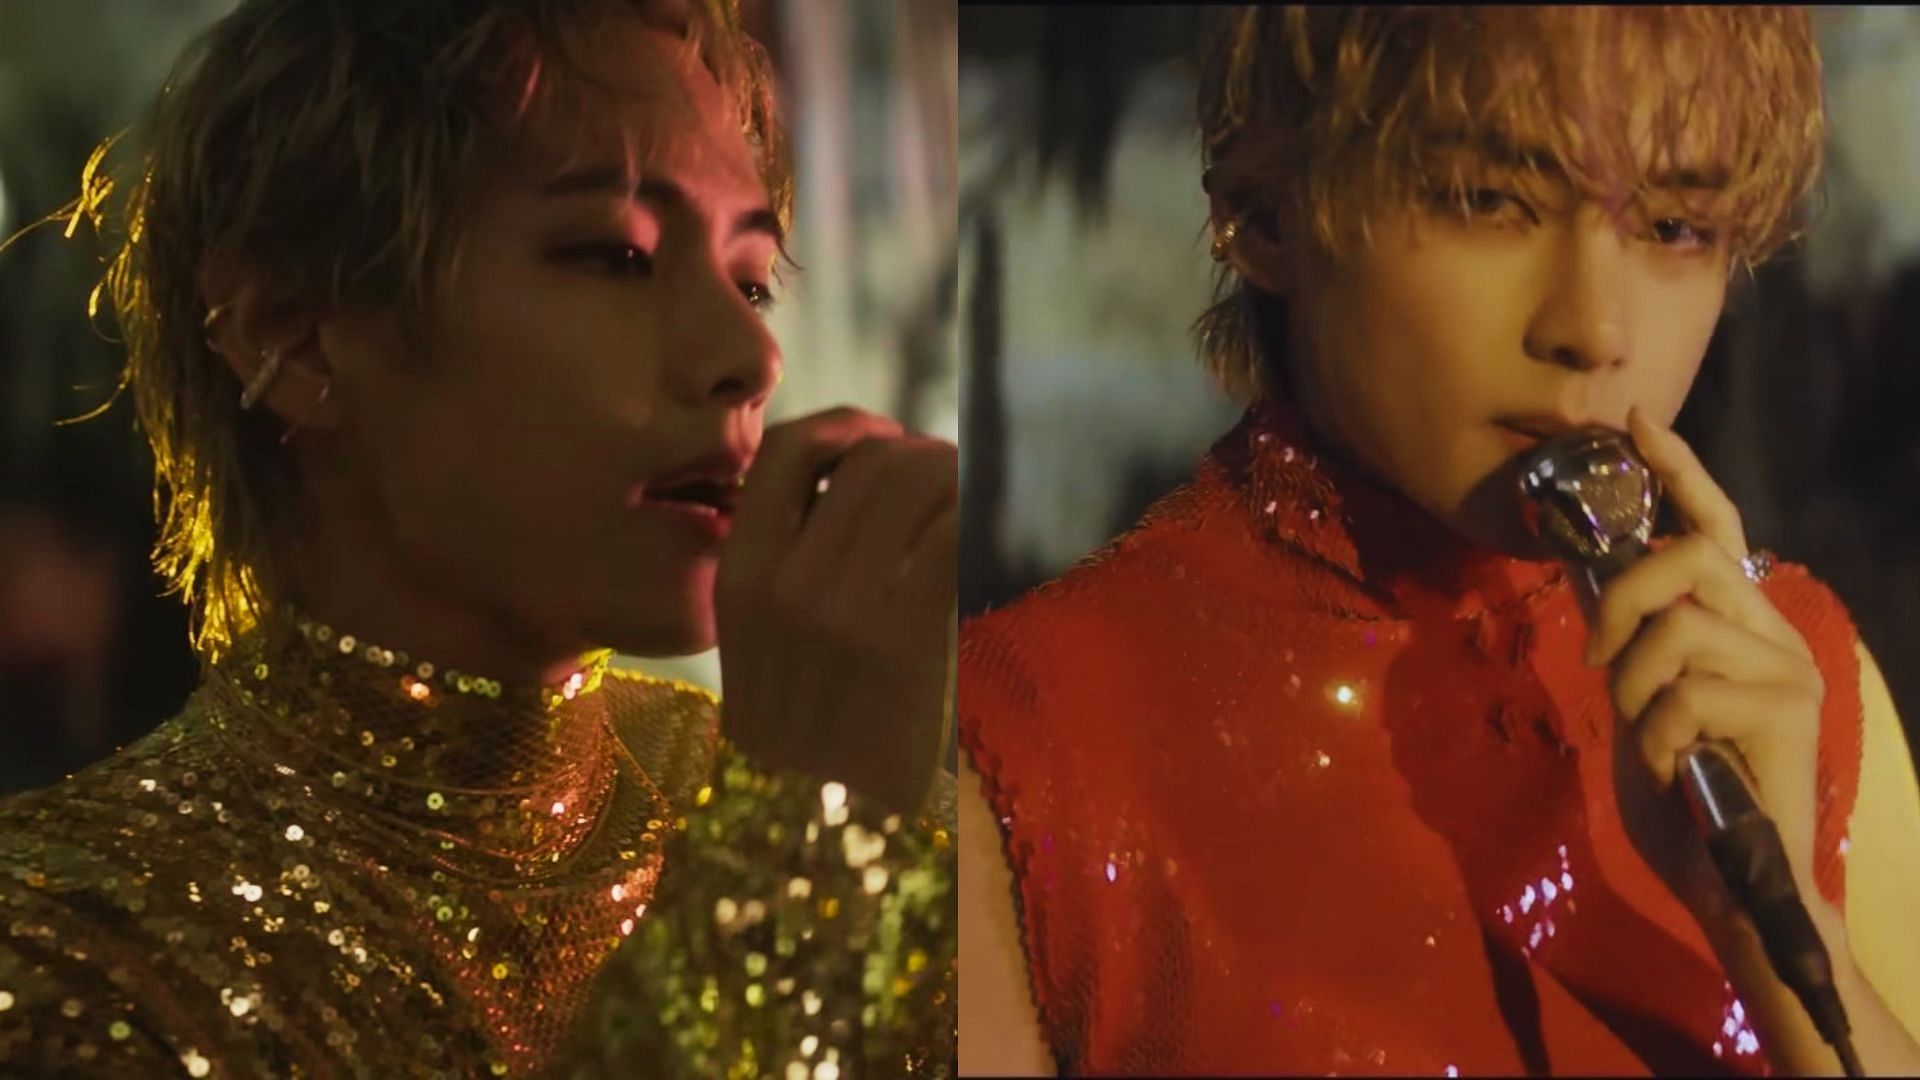 V shines in his latest Love Me Again (Images via Twitter/partaetae)